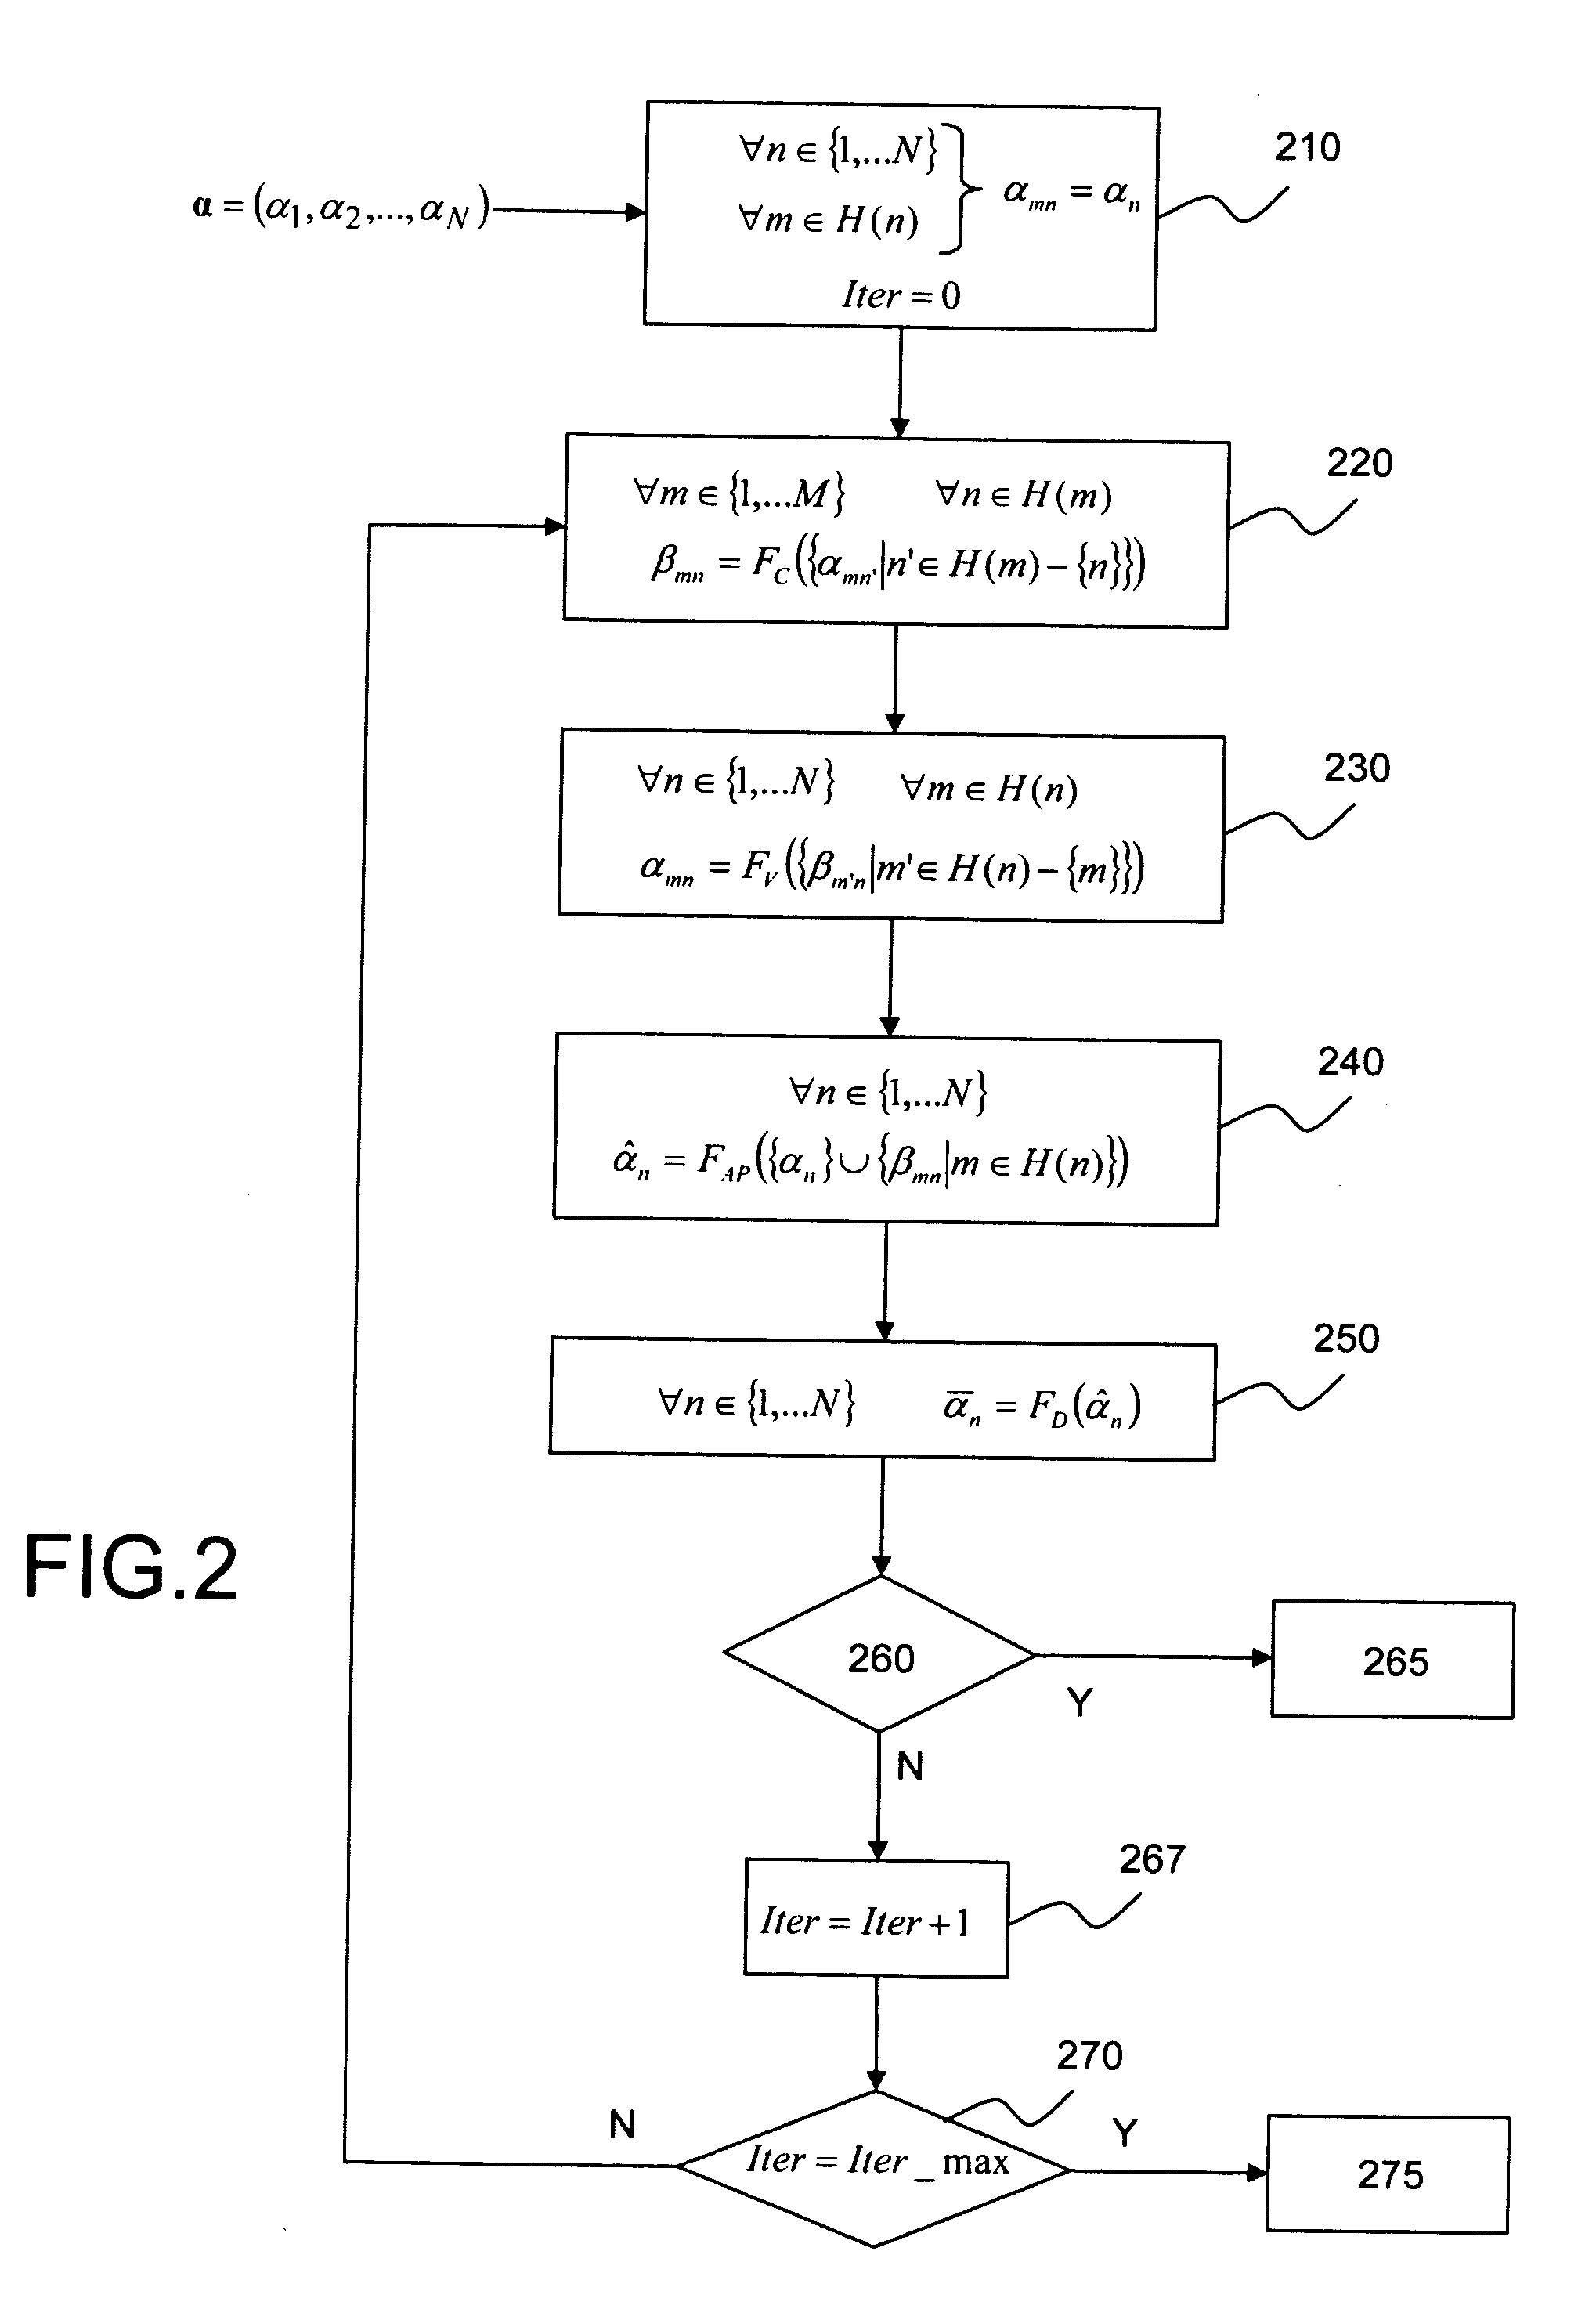 Message- passing and forced convergence decoding method